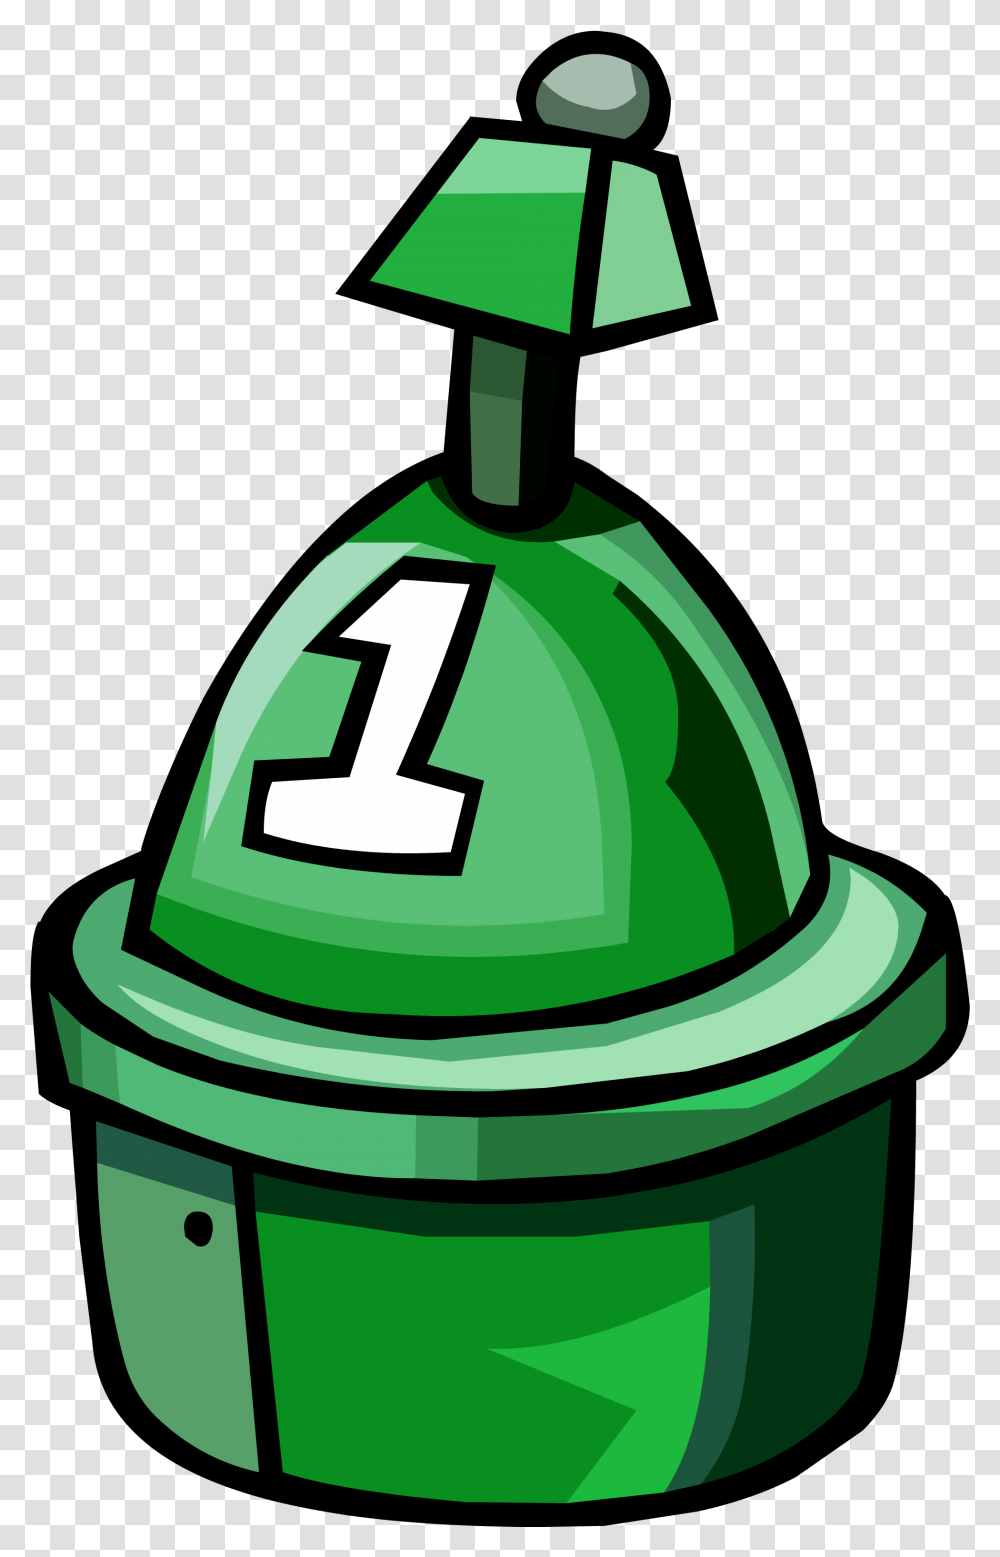 Club Penguin Buoy Image With No Clip Art, Birthday Cake, Dessert, Food Transparent Png